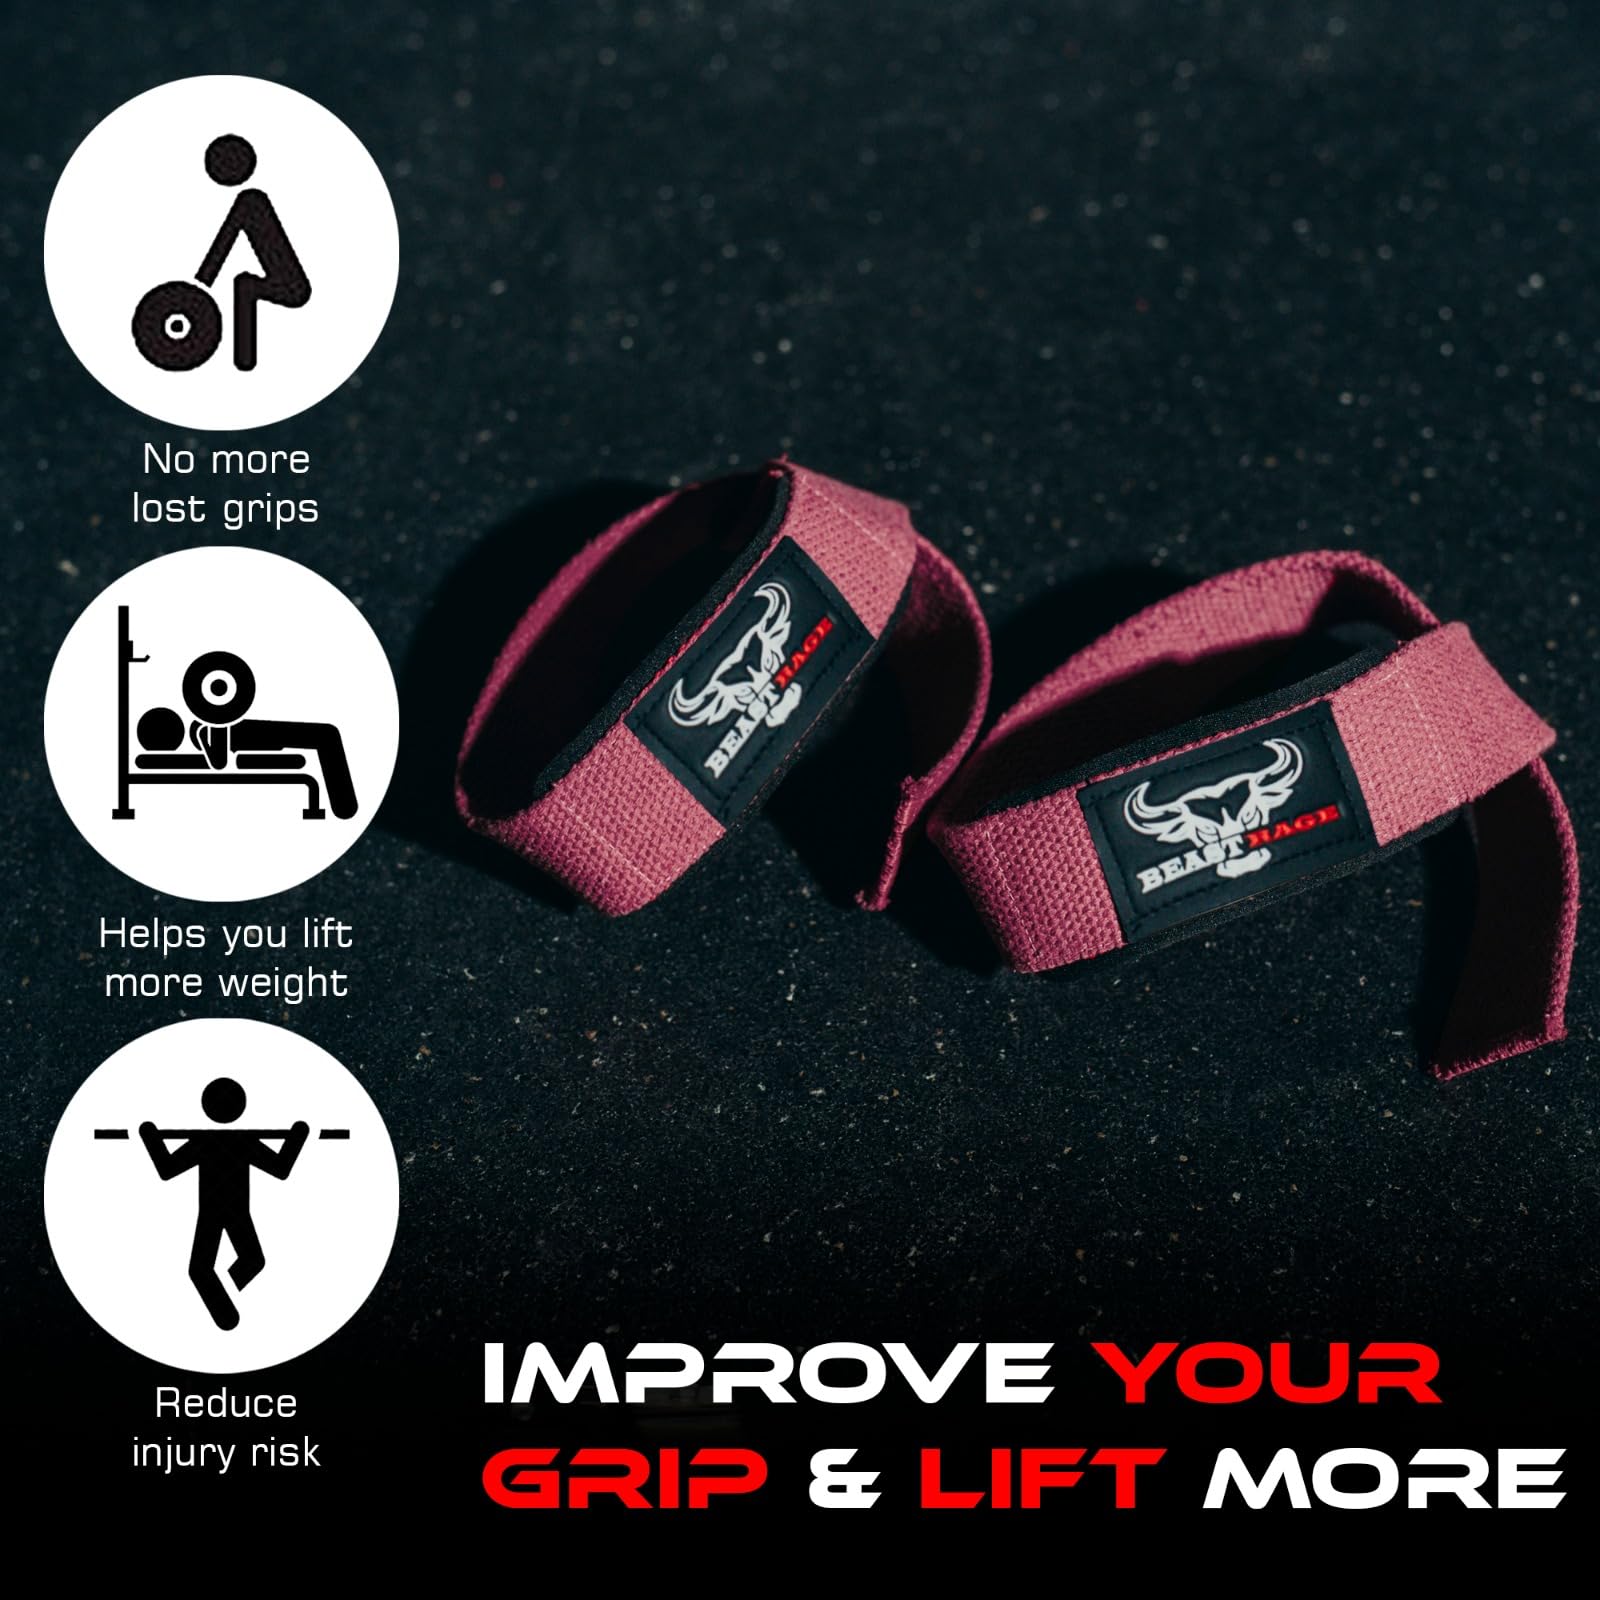 BEAST RAGE Weight Lifting Straps Fitness Padded Cotton Wrist Support Gel Advanced Grips Dumbbell Bar Wraps Heavy Duty Gym Bodybuilding Straps Power Deadlift Barbells Non Slip Exercise (T-Pink)